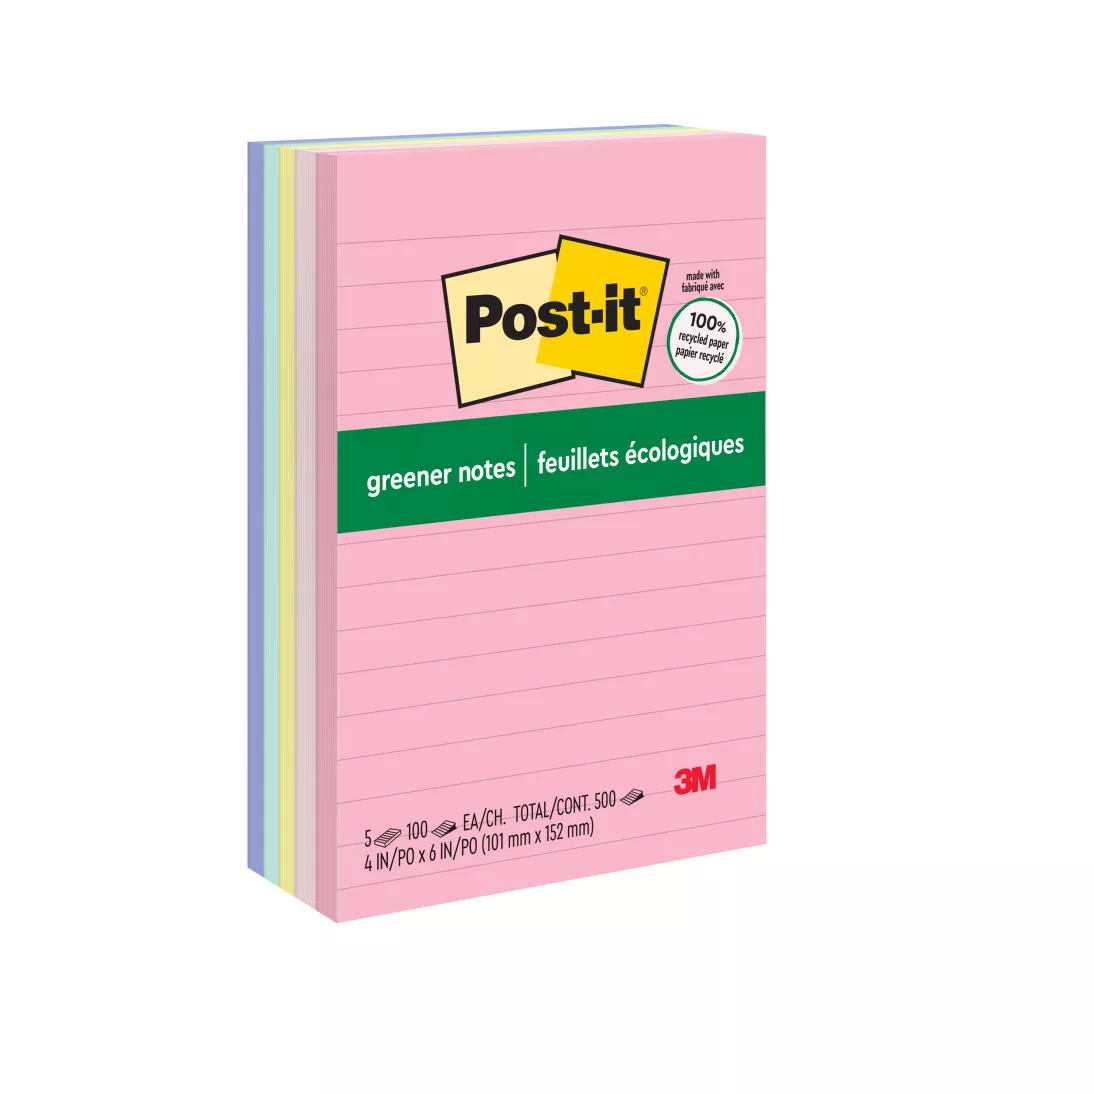 Post-it® Greener Notes 660-RP-A, 4 in x 6 in (101 mm x 152 mm) Helsinki
colors